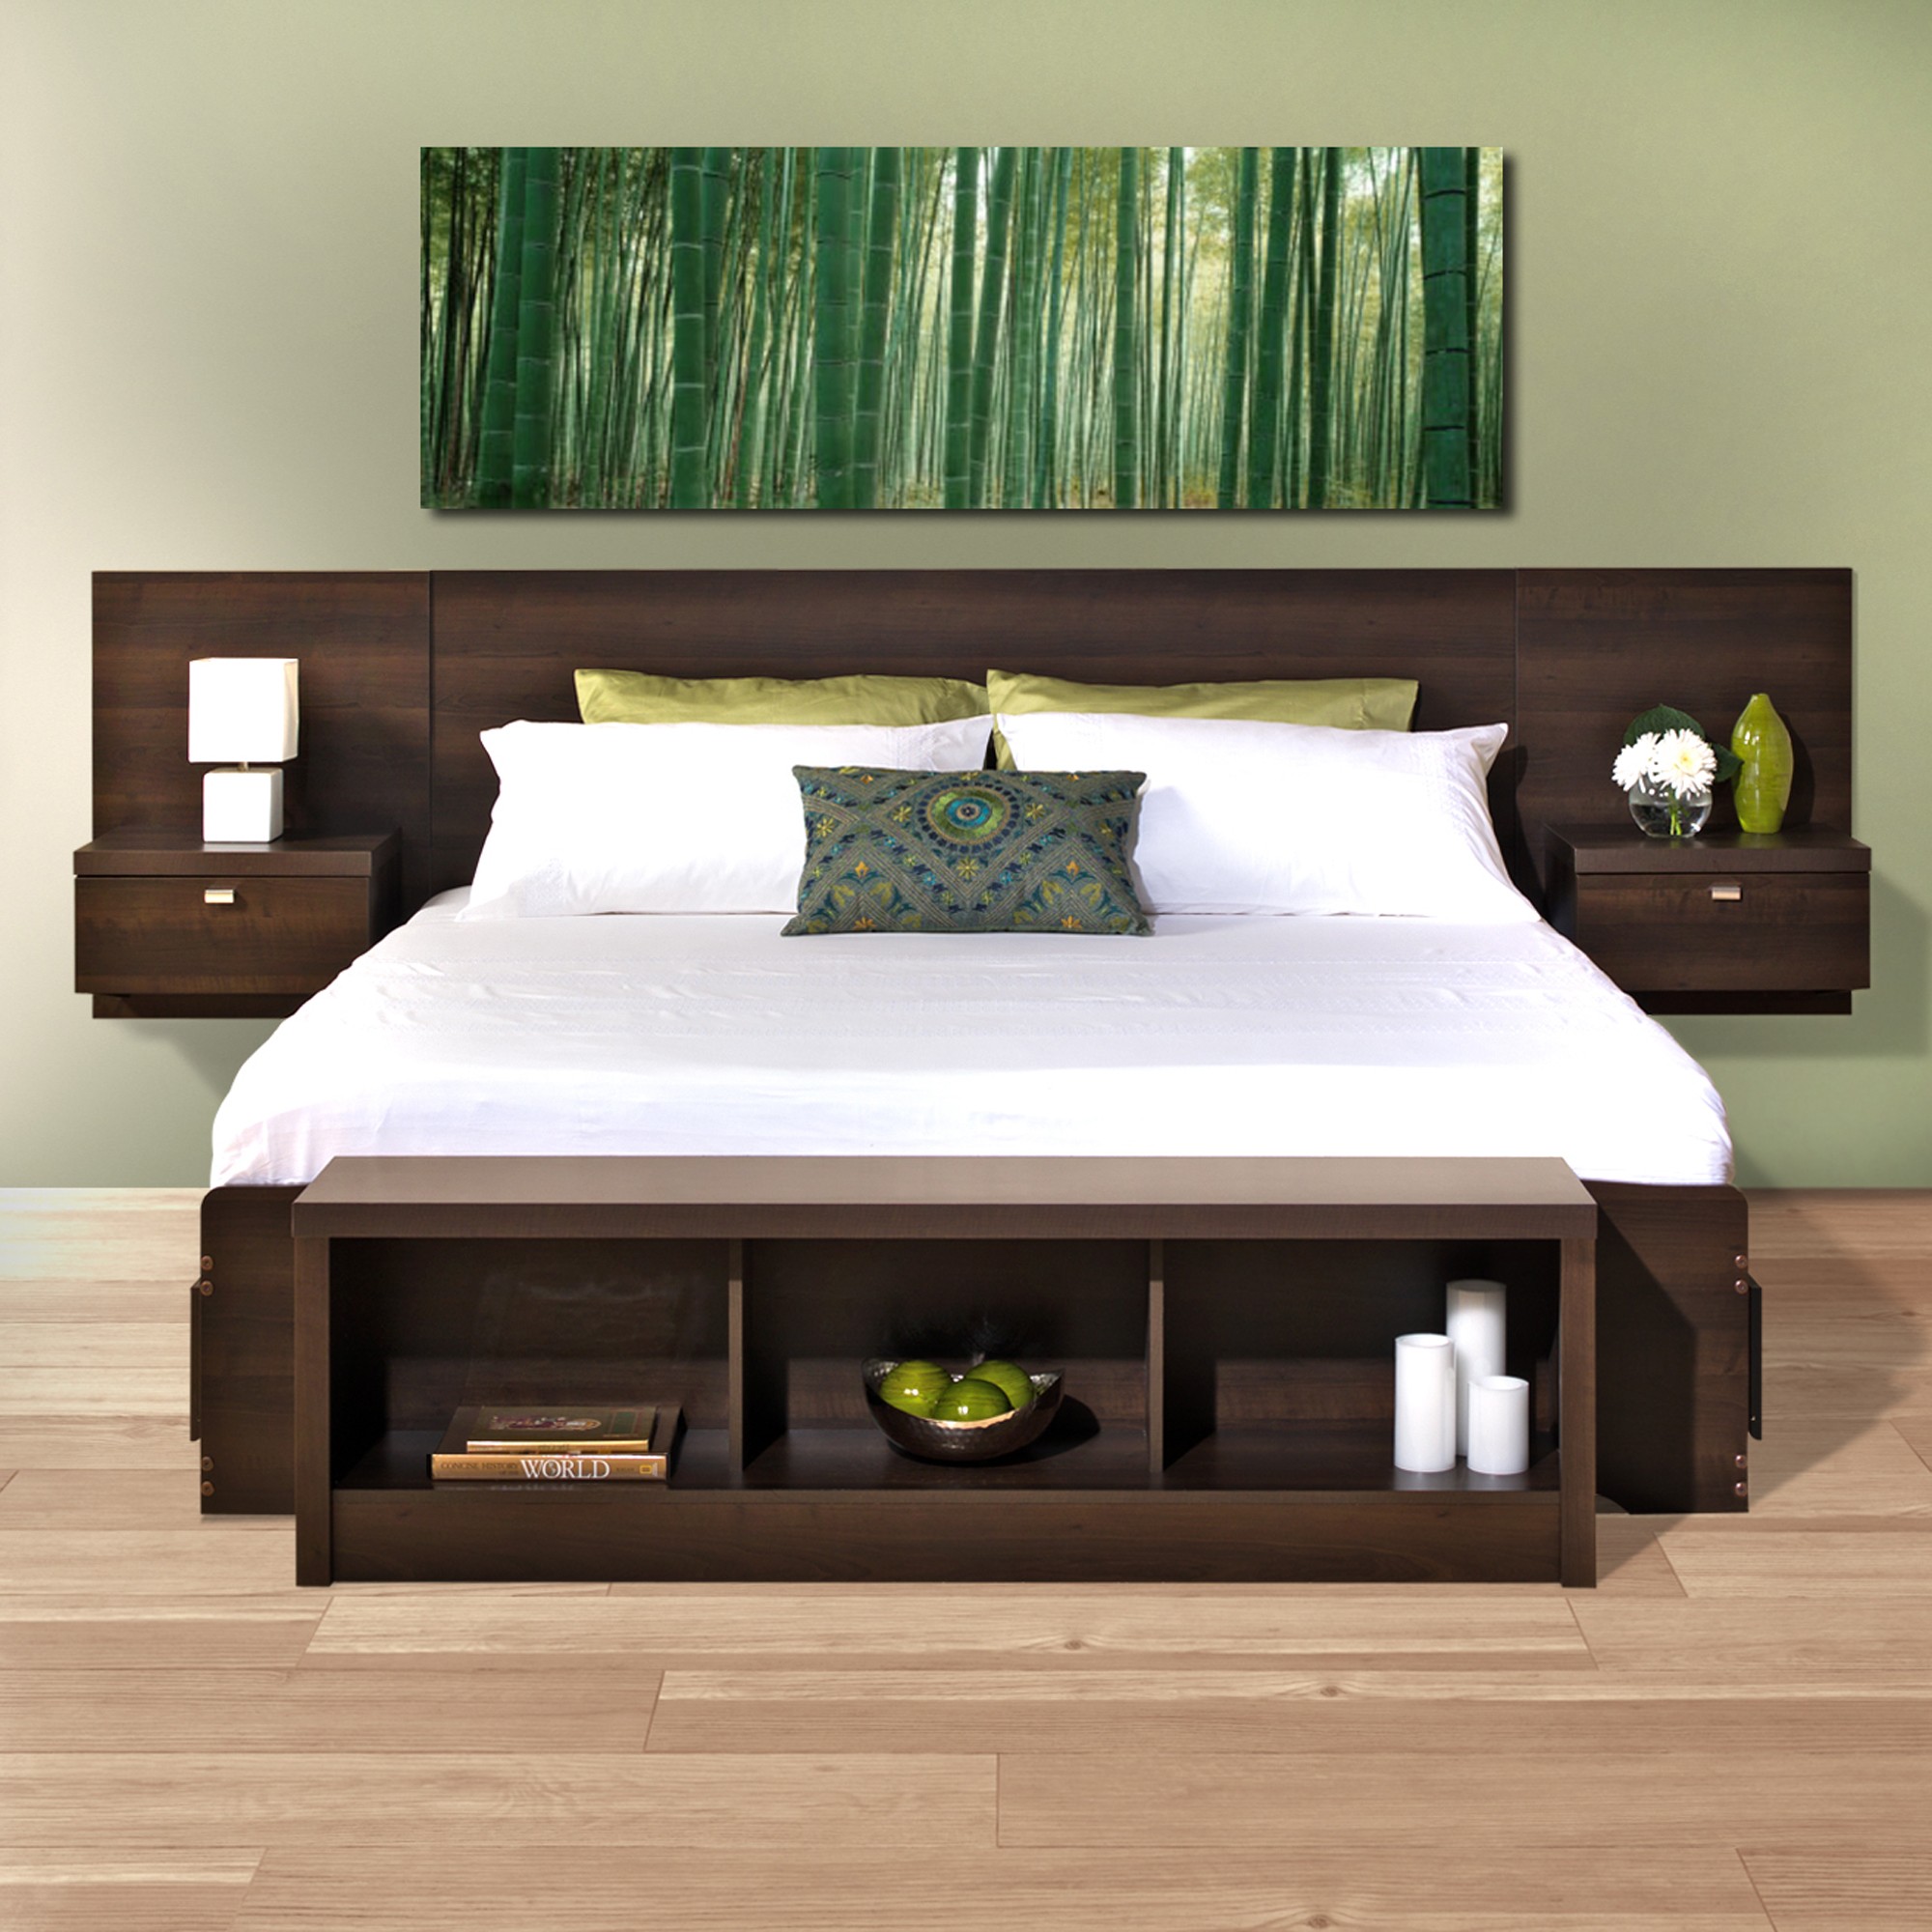 New Modern Wooden Headboard Designs with Simple Decor